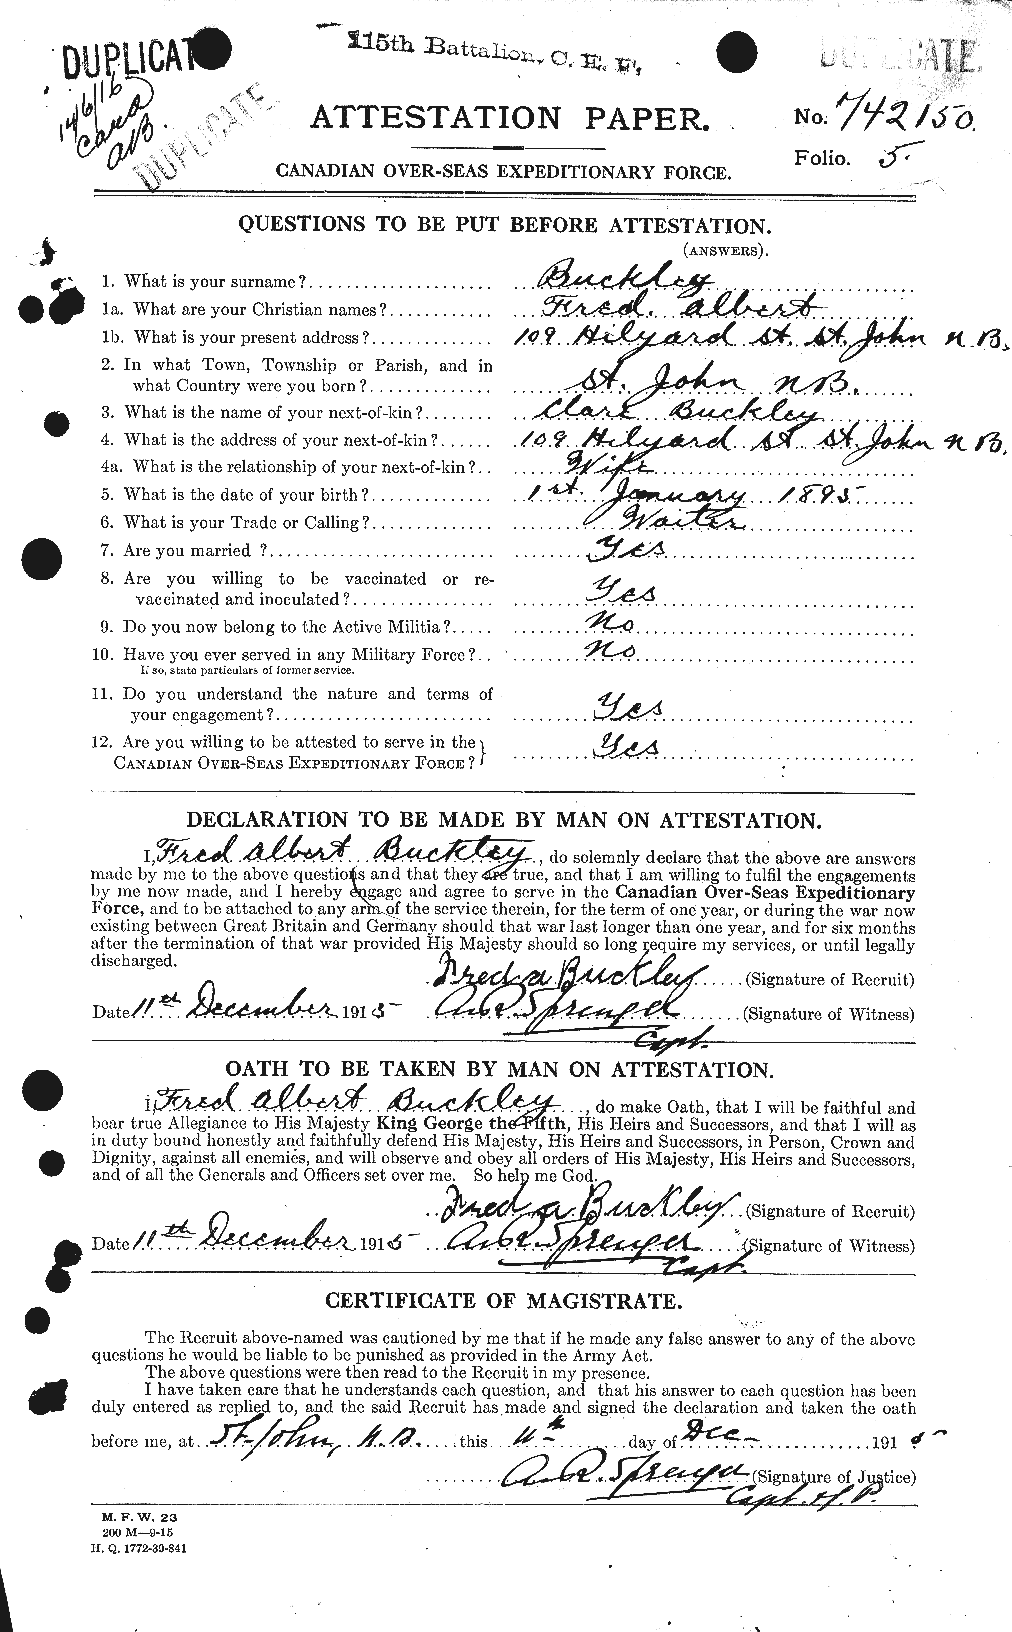 Personnel Records of the First World War - CEF 271089a